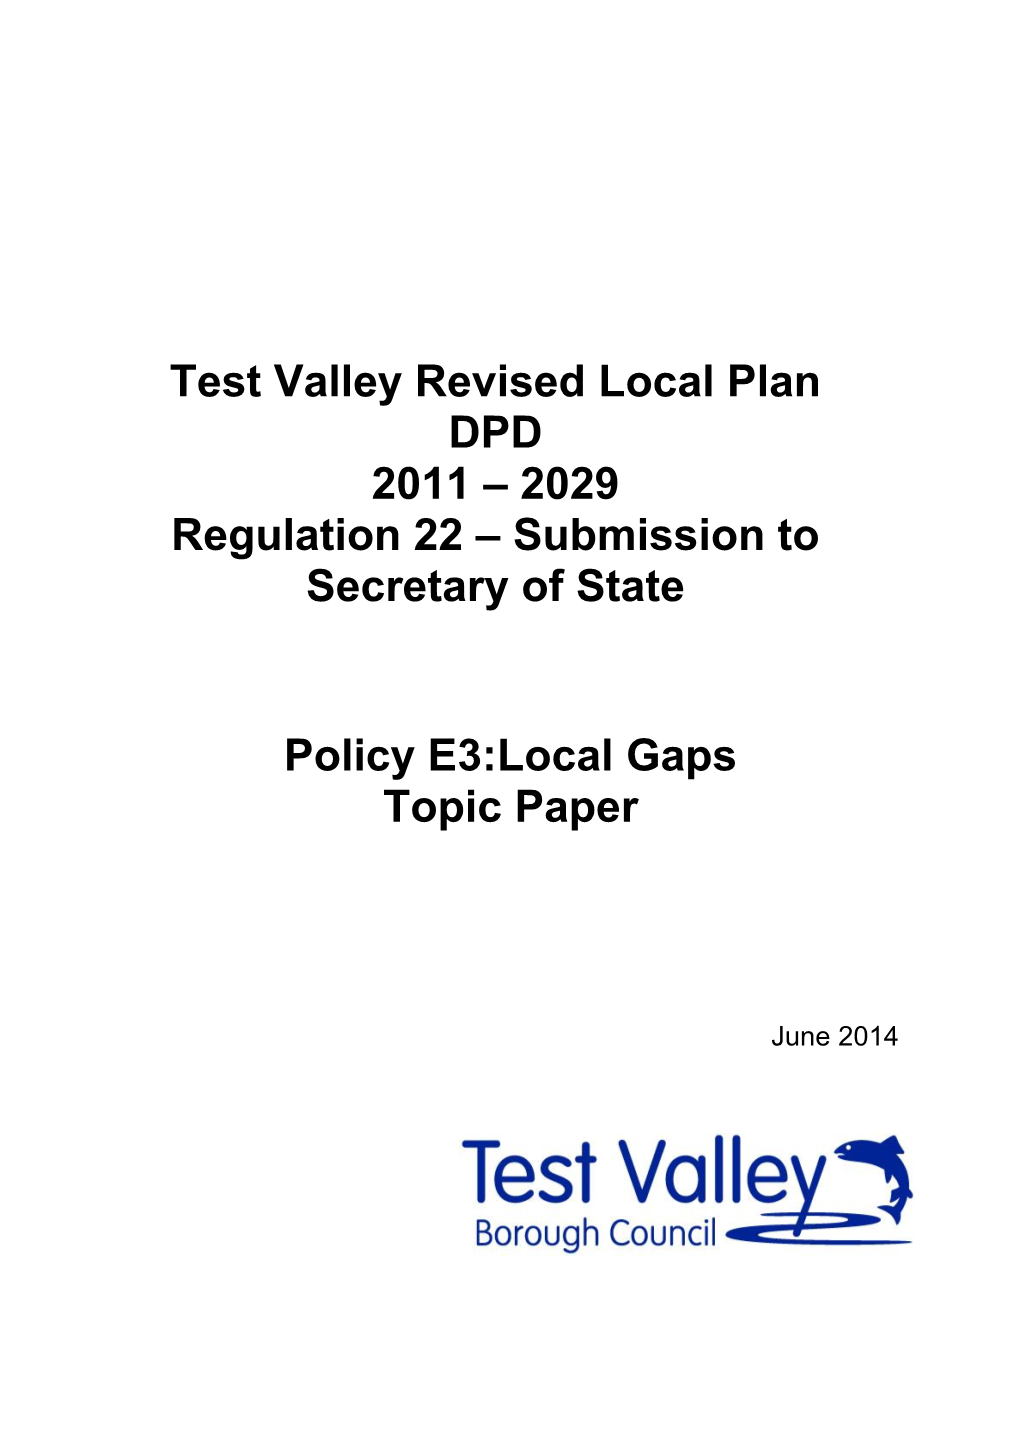 Test Valley Revised Local Plan DPD 2011 – 2029 Regulation 22 – Submission to Secretary of State